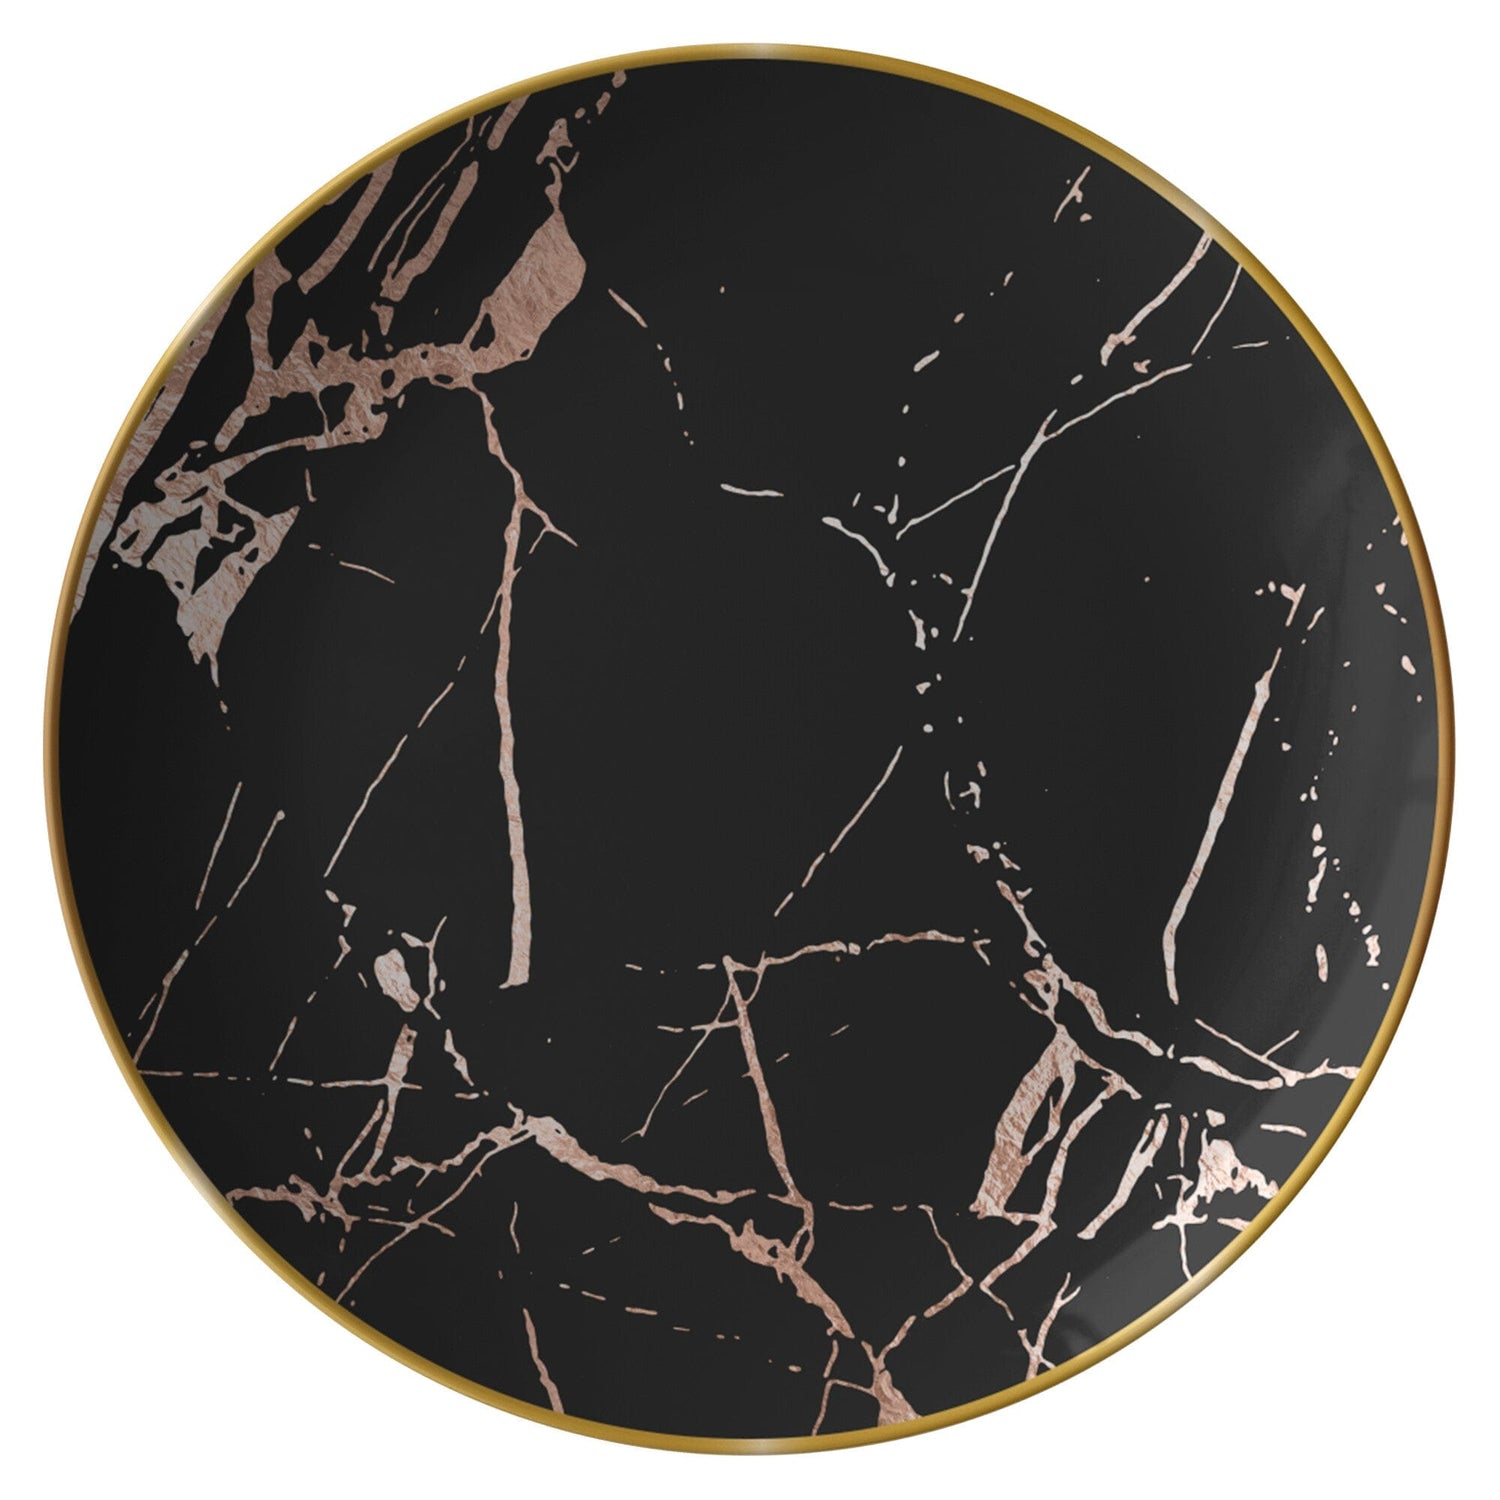 Kate McEnroe New York Dinner Plates in Luxurious Black &amp; Gold Marble Veins with Gold Rim Plates